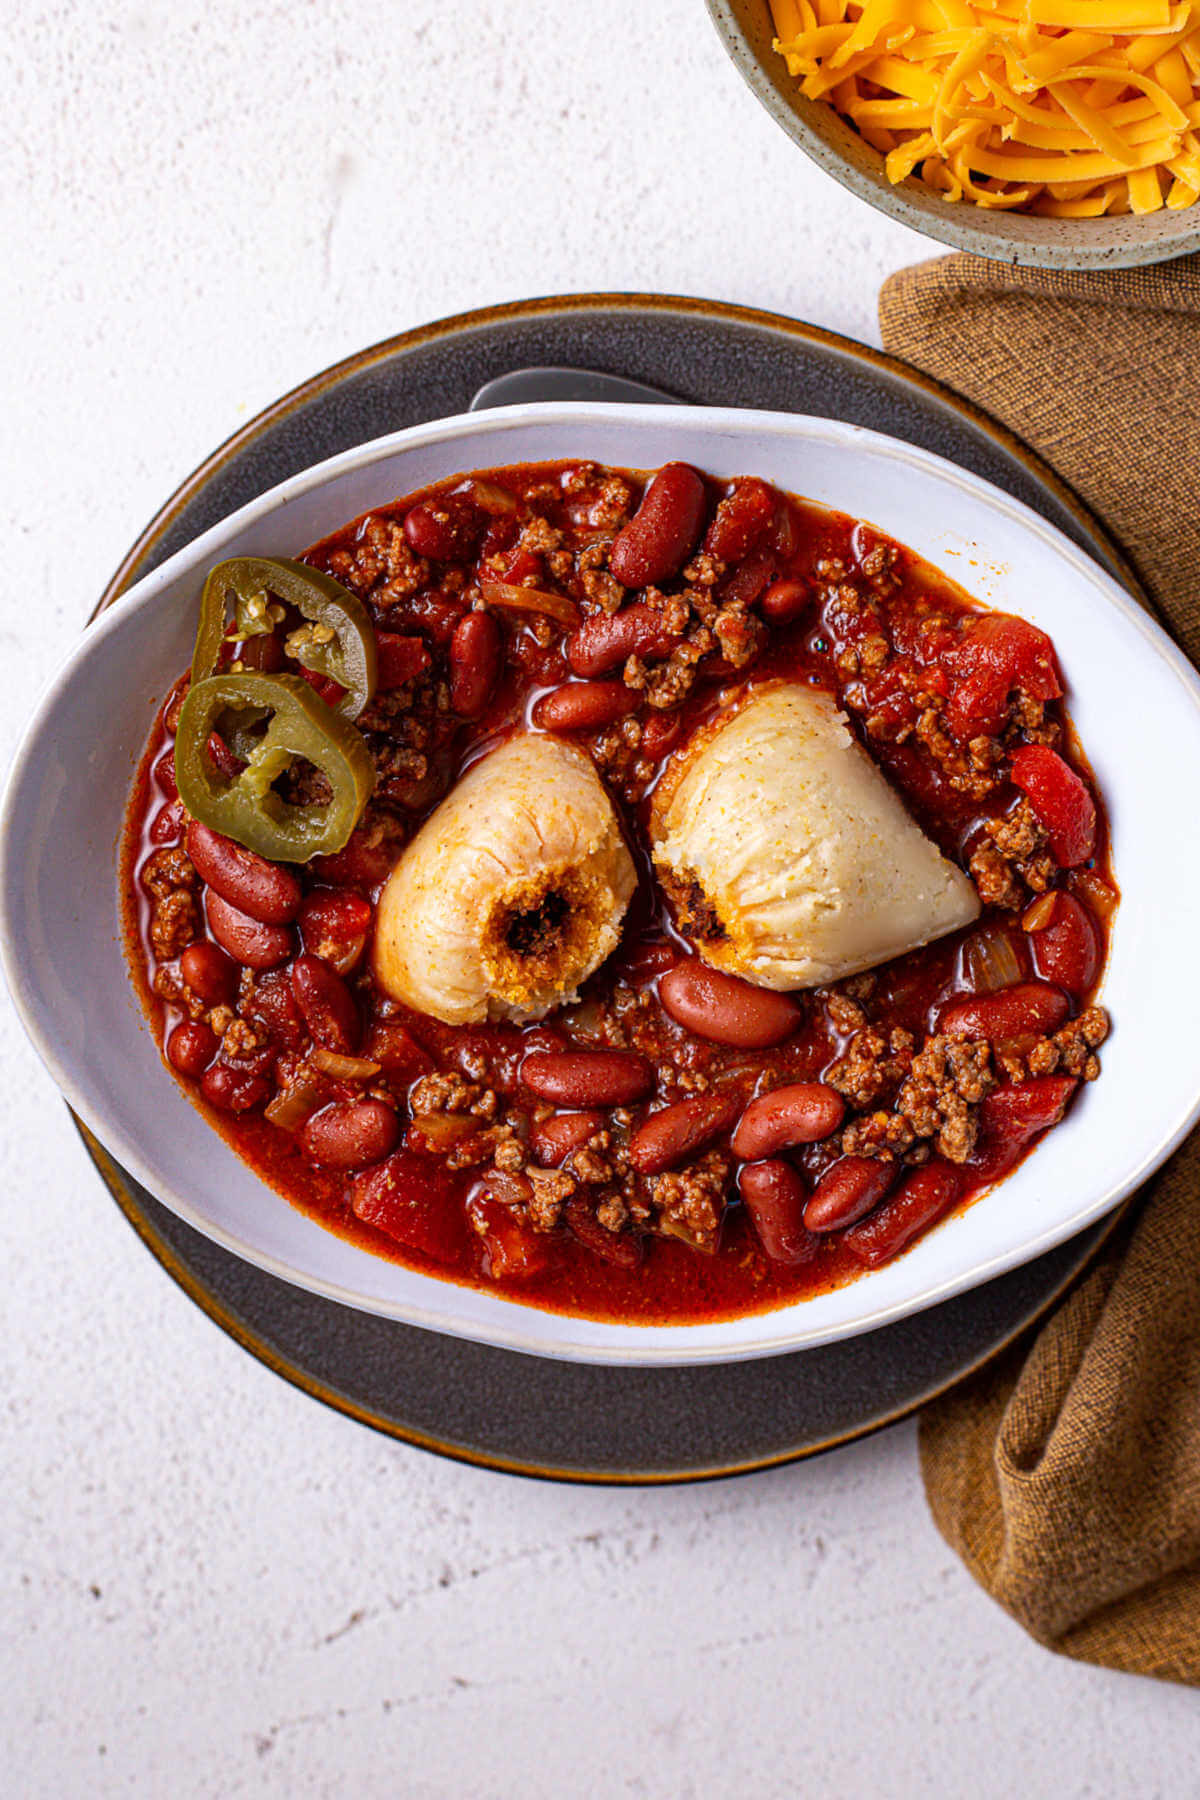 A full house (hot tamales in a bowl of chili) garnished with jalapeno slices on a plate.